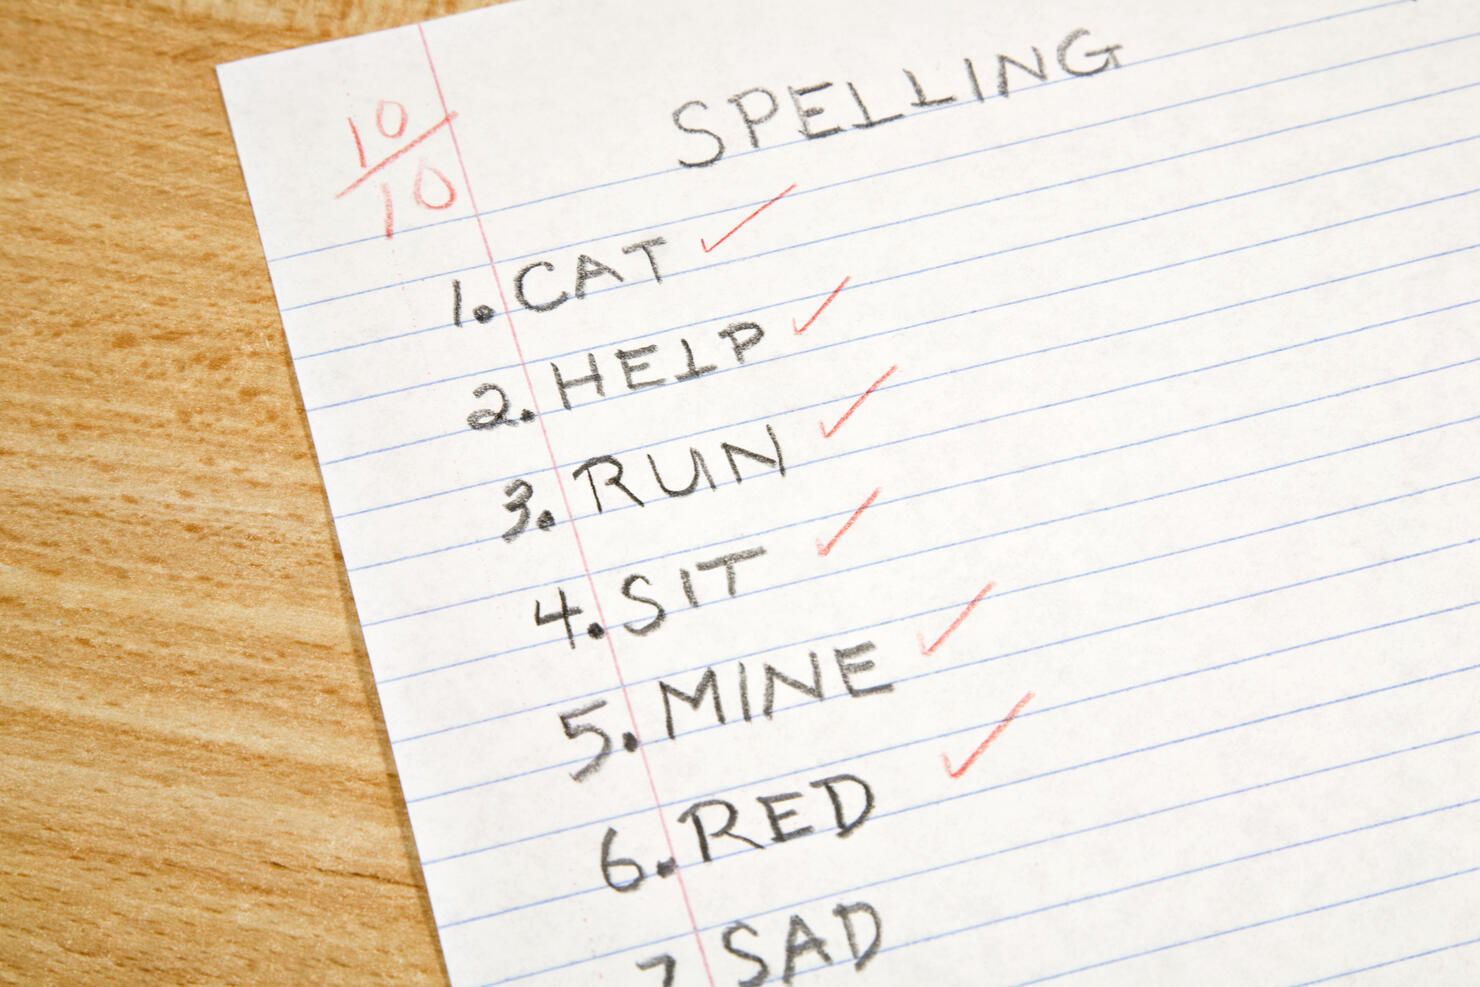 A+ elementary spelling test corrected by teacher